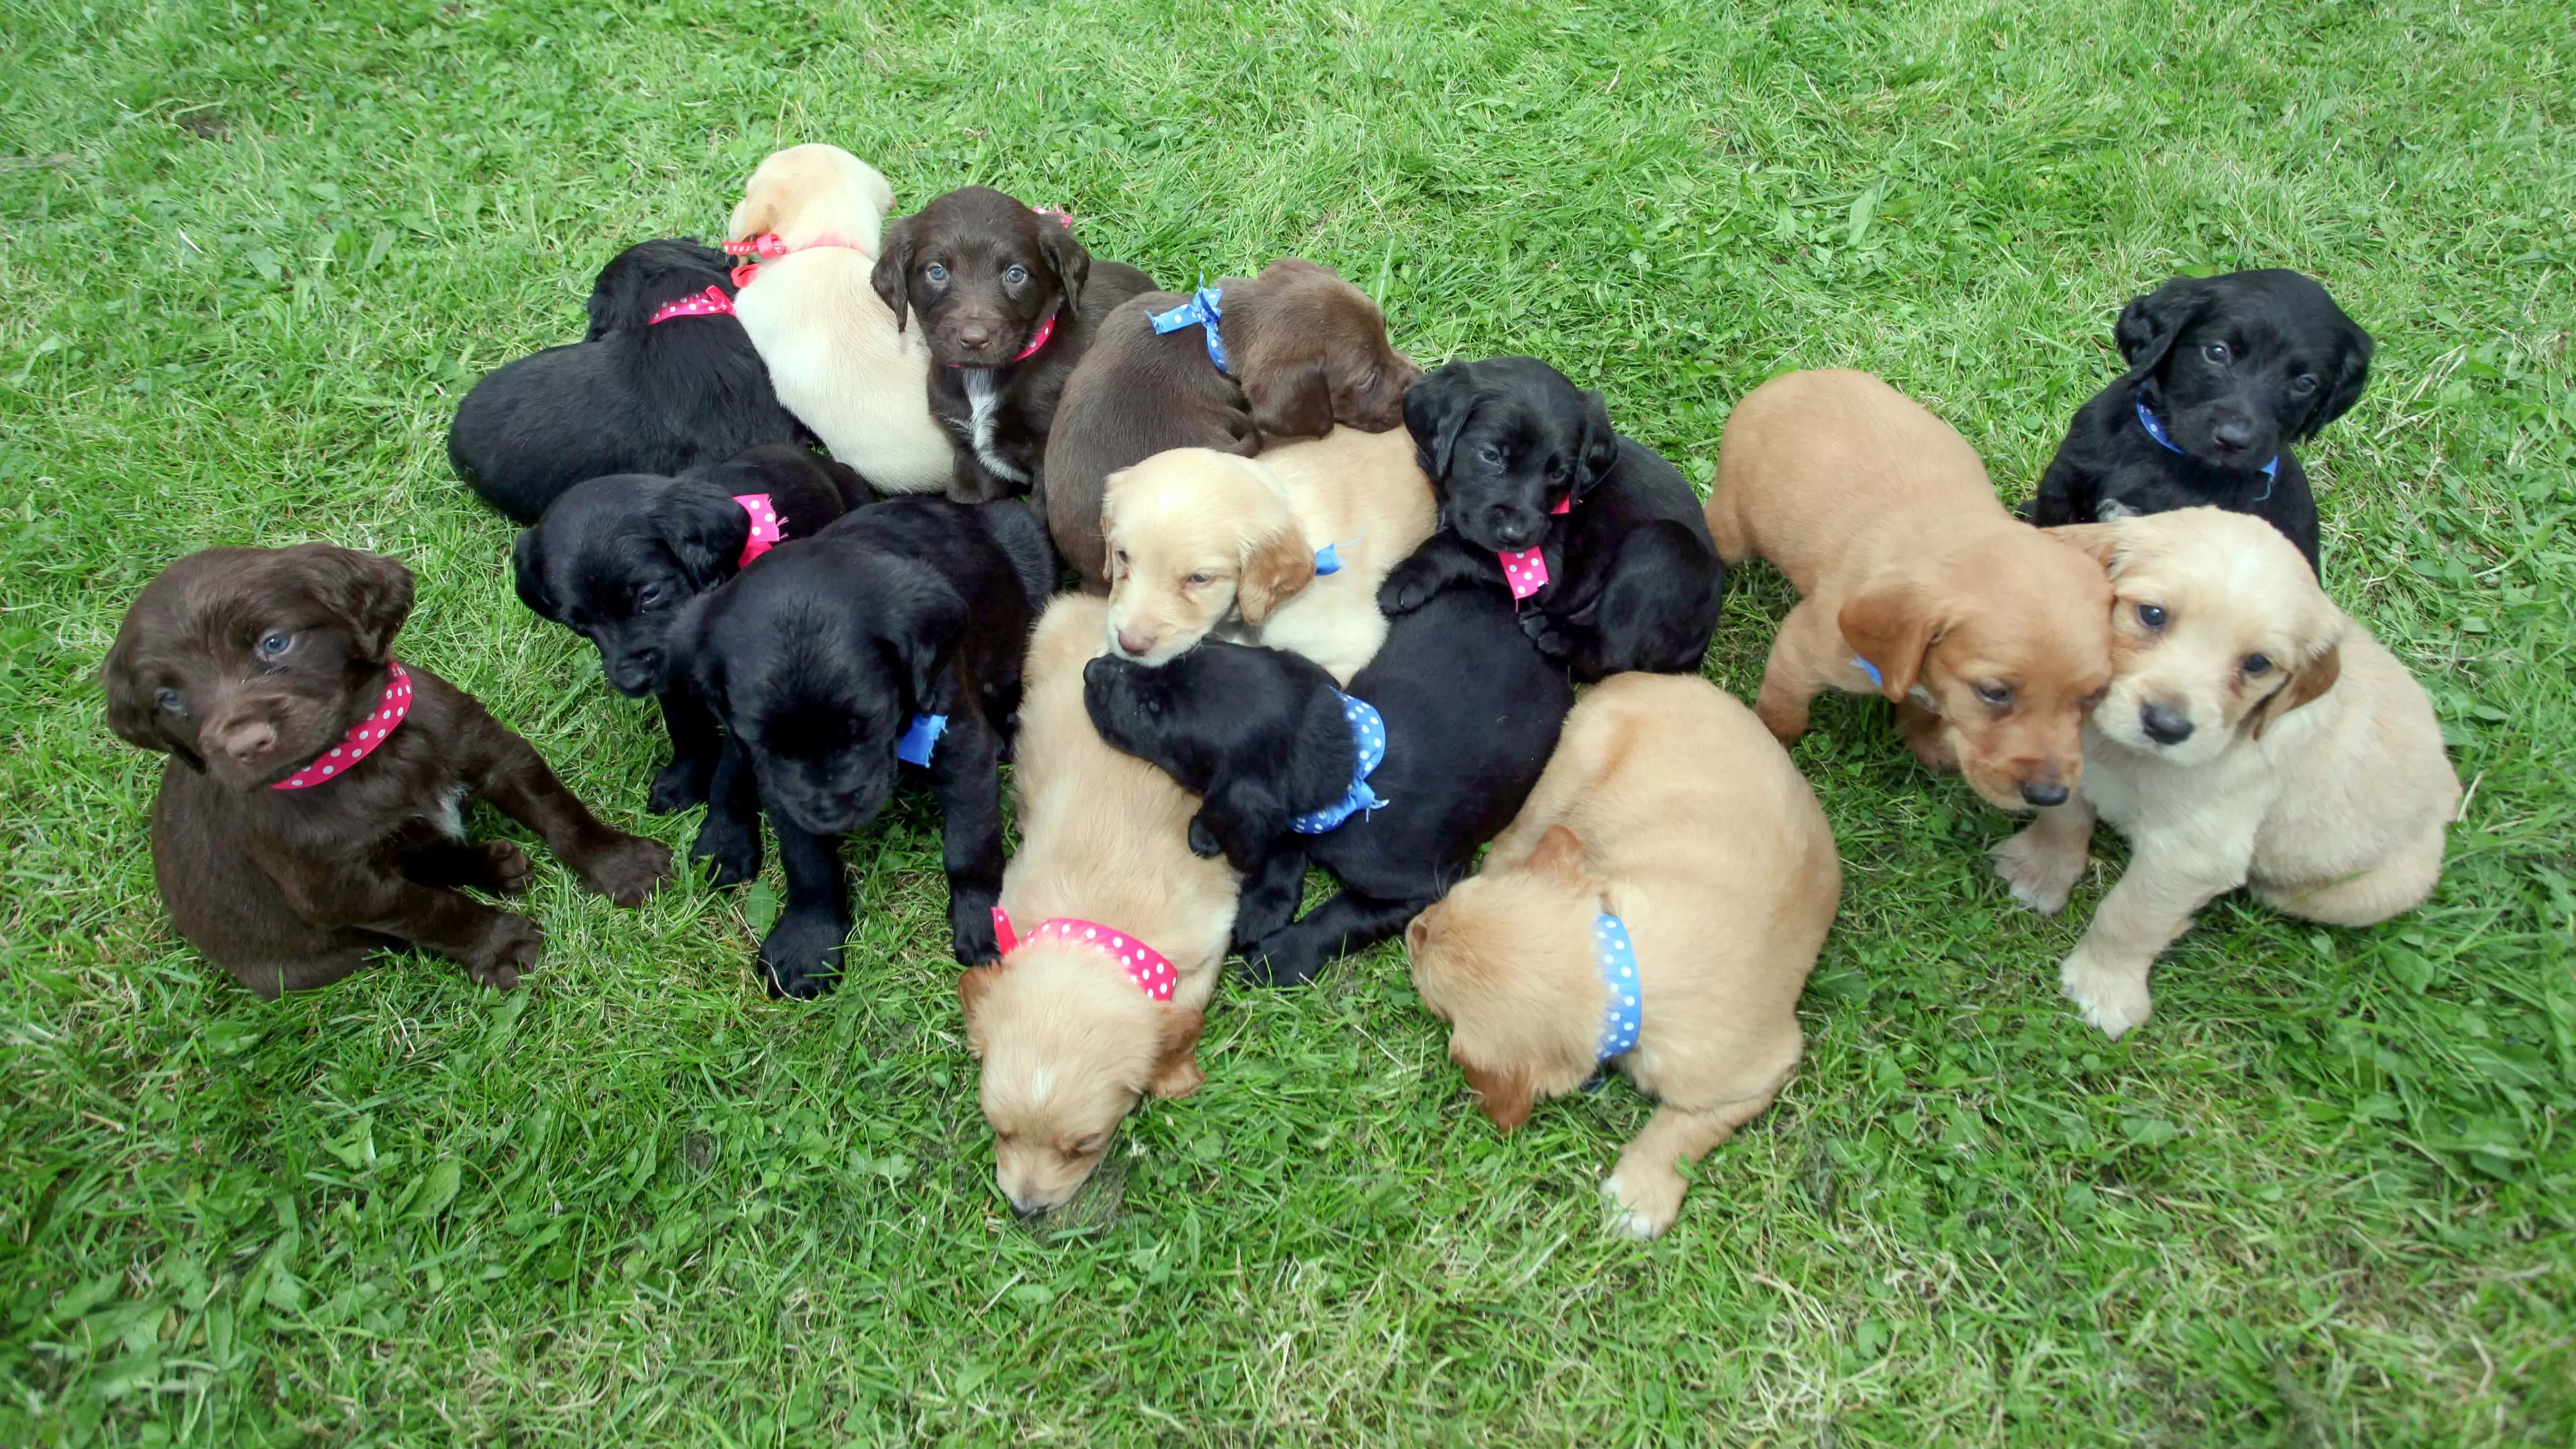 Dog Gives Birth To One Of The Largest Litters Ever Of 16 Puppies